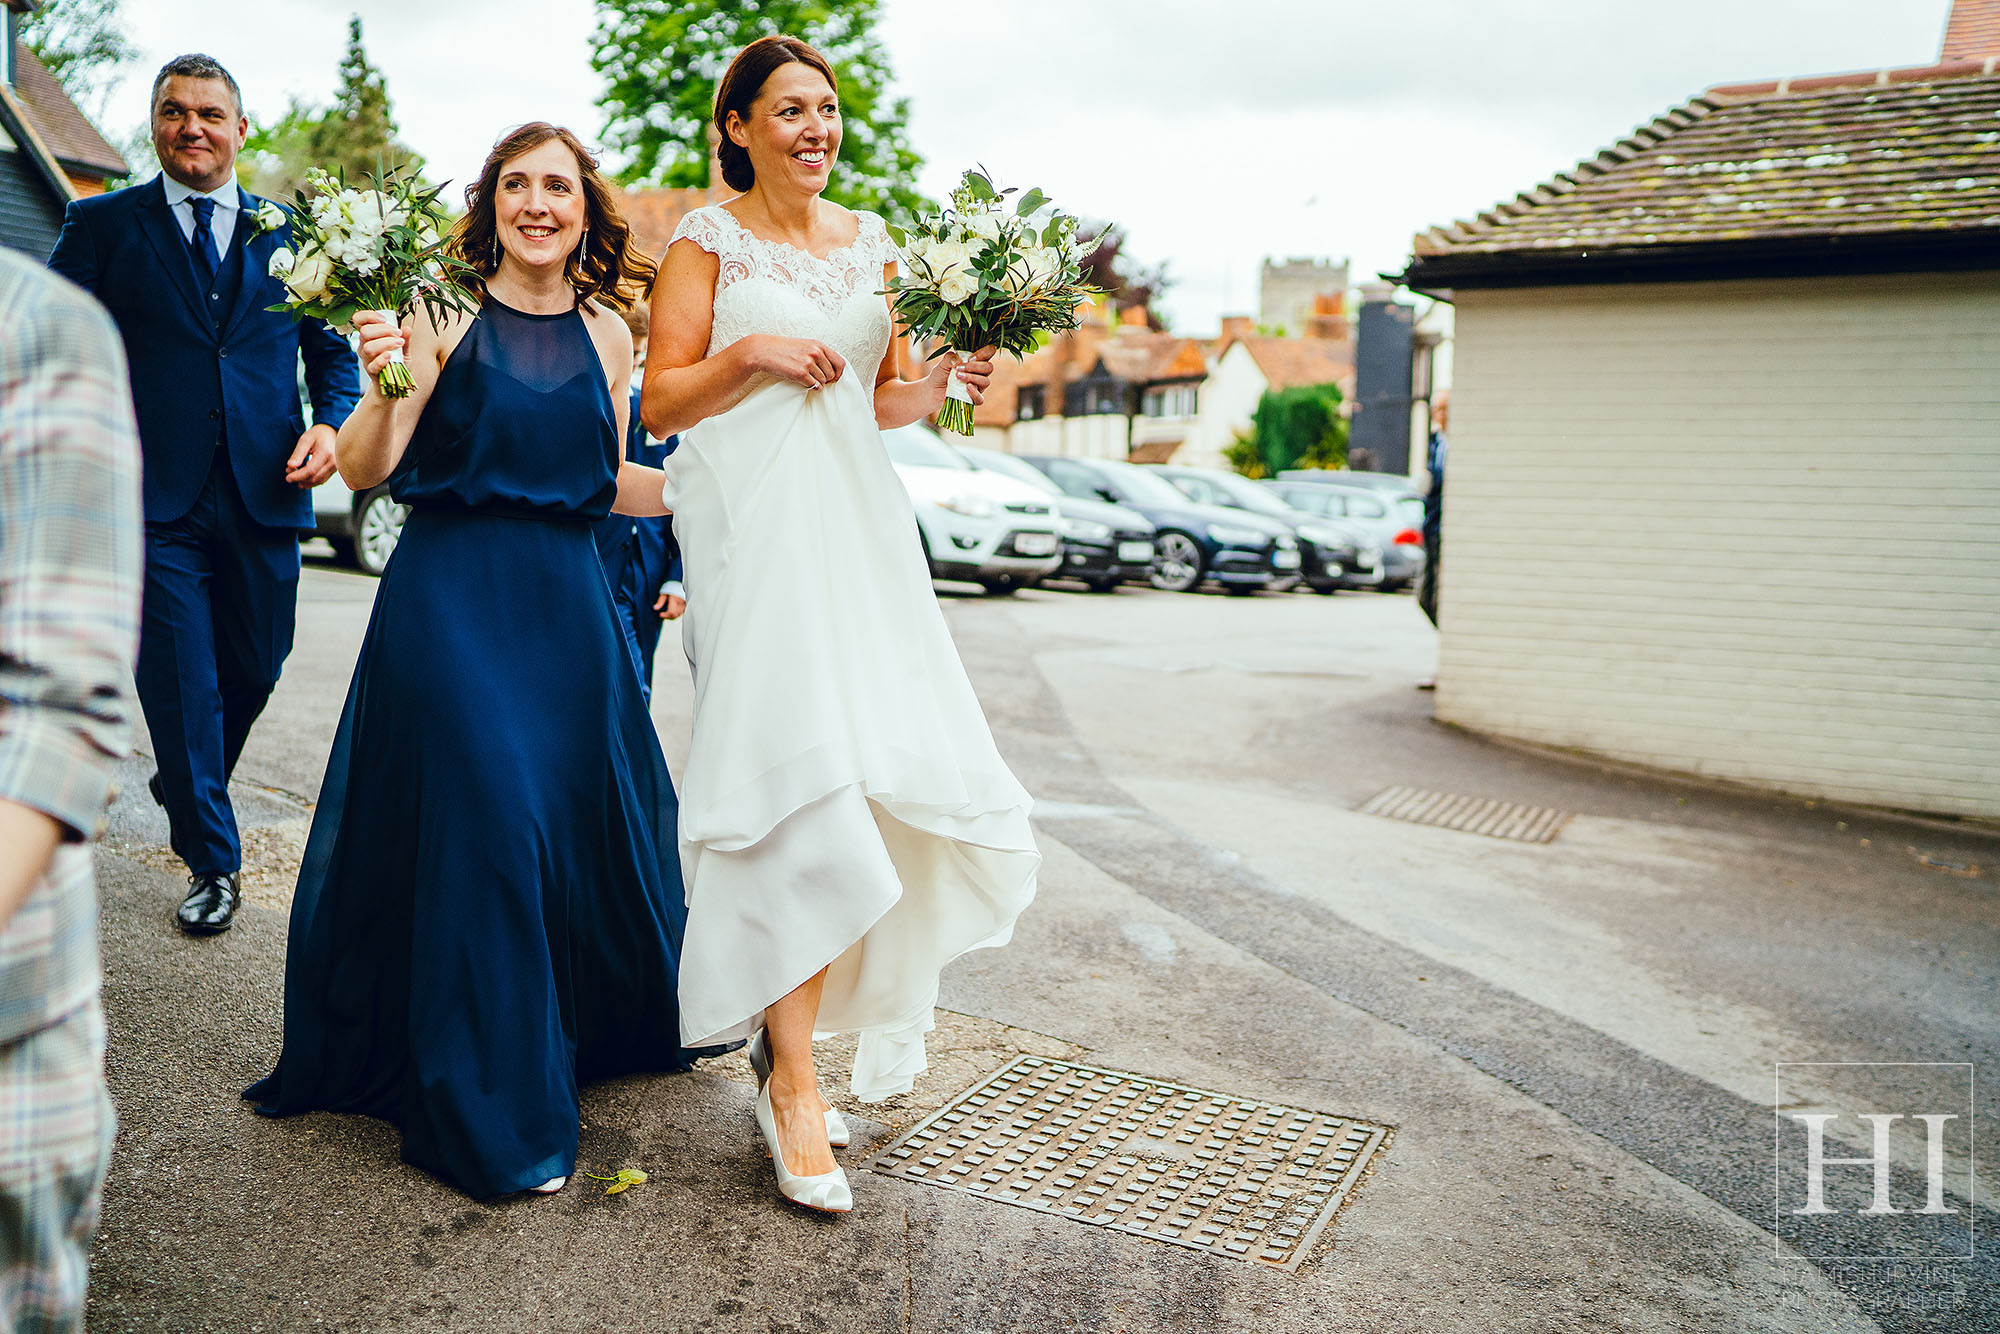 Great House Sonning Wedding Photography